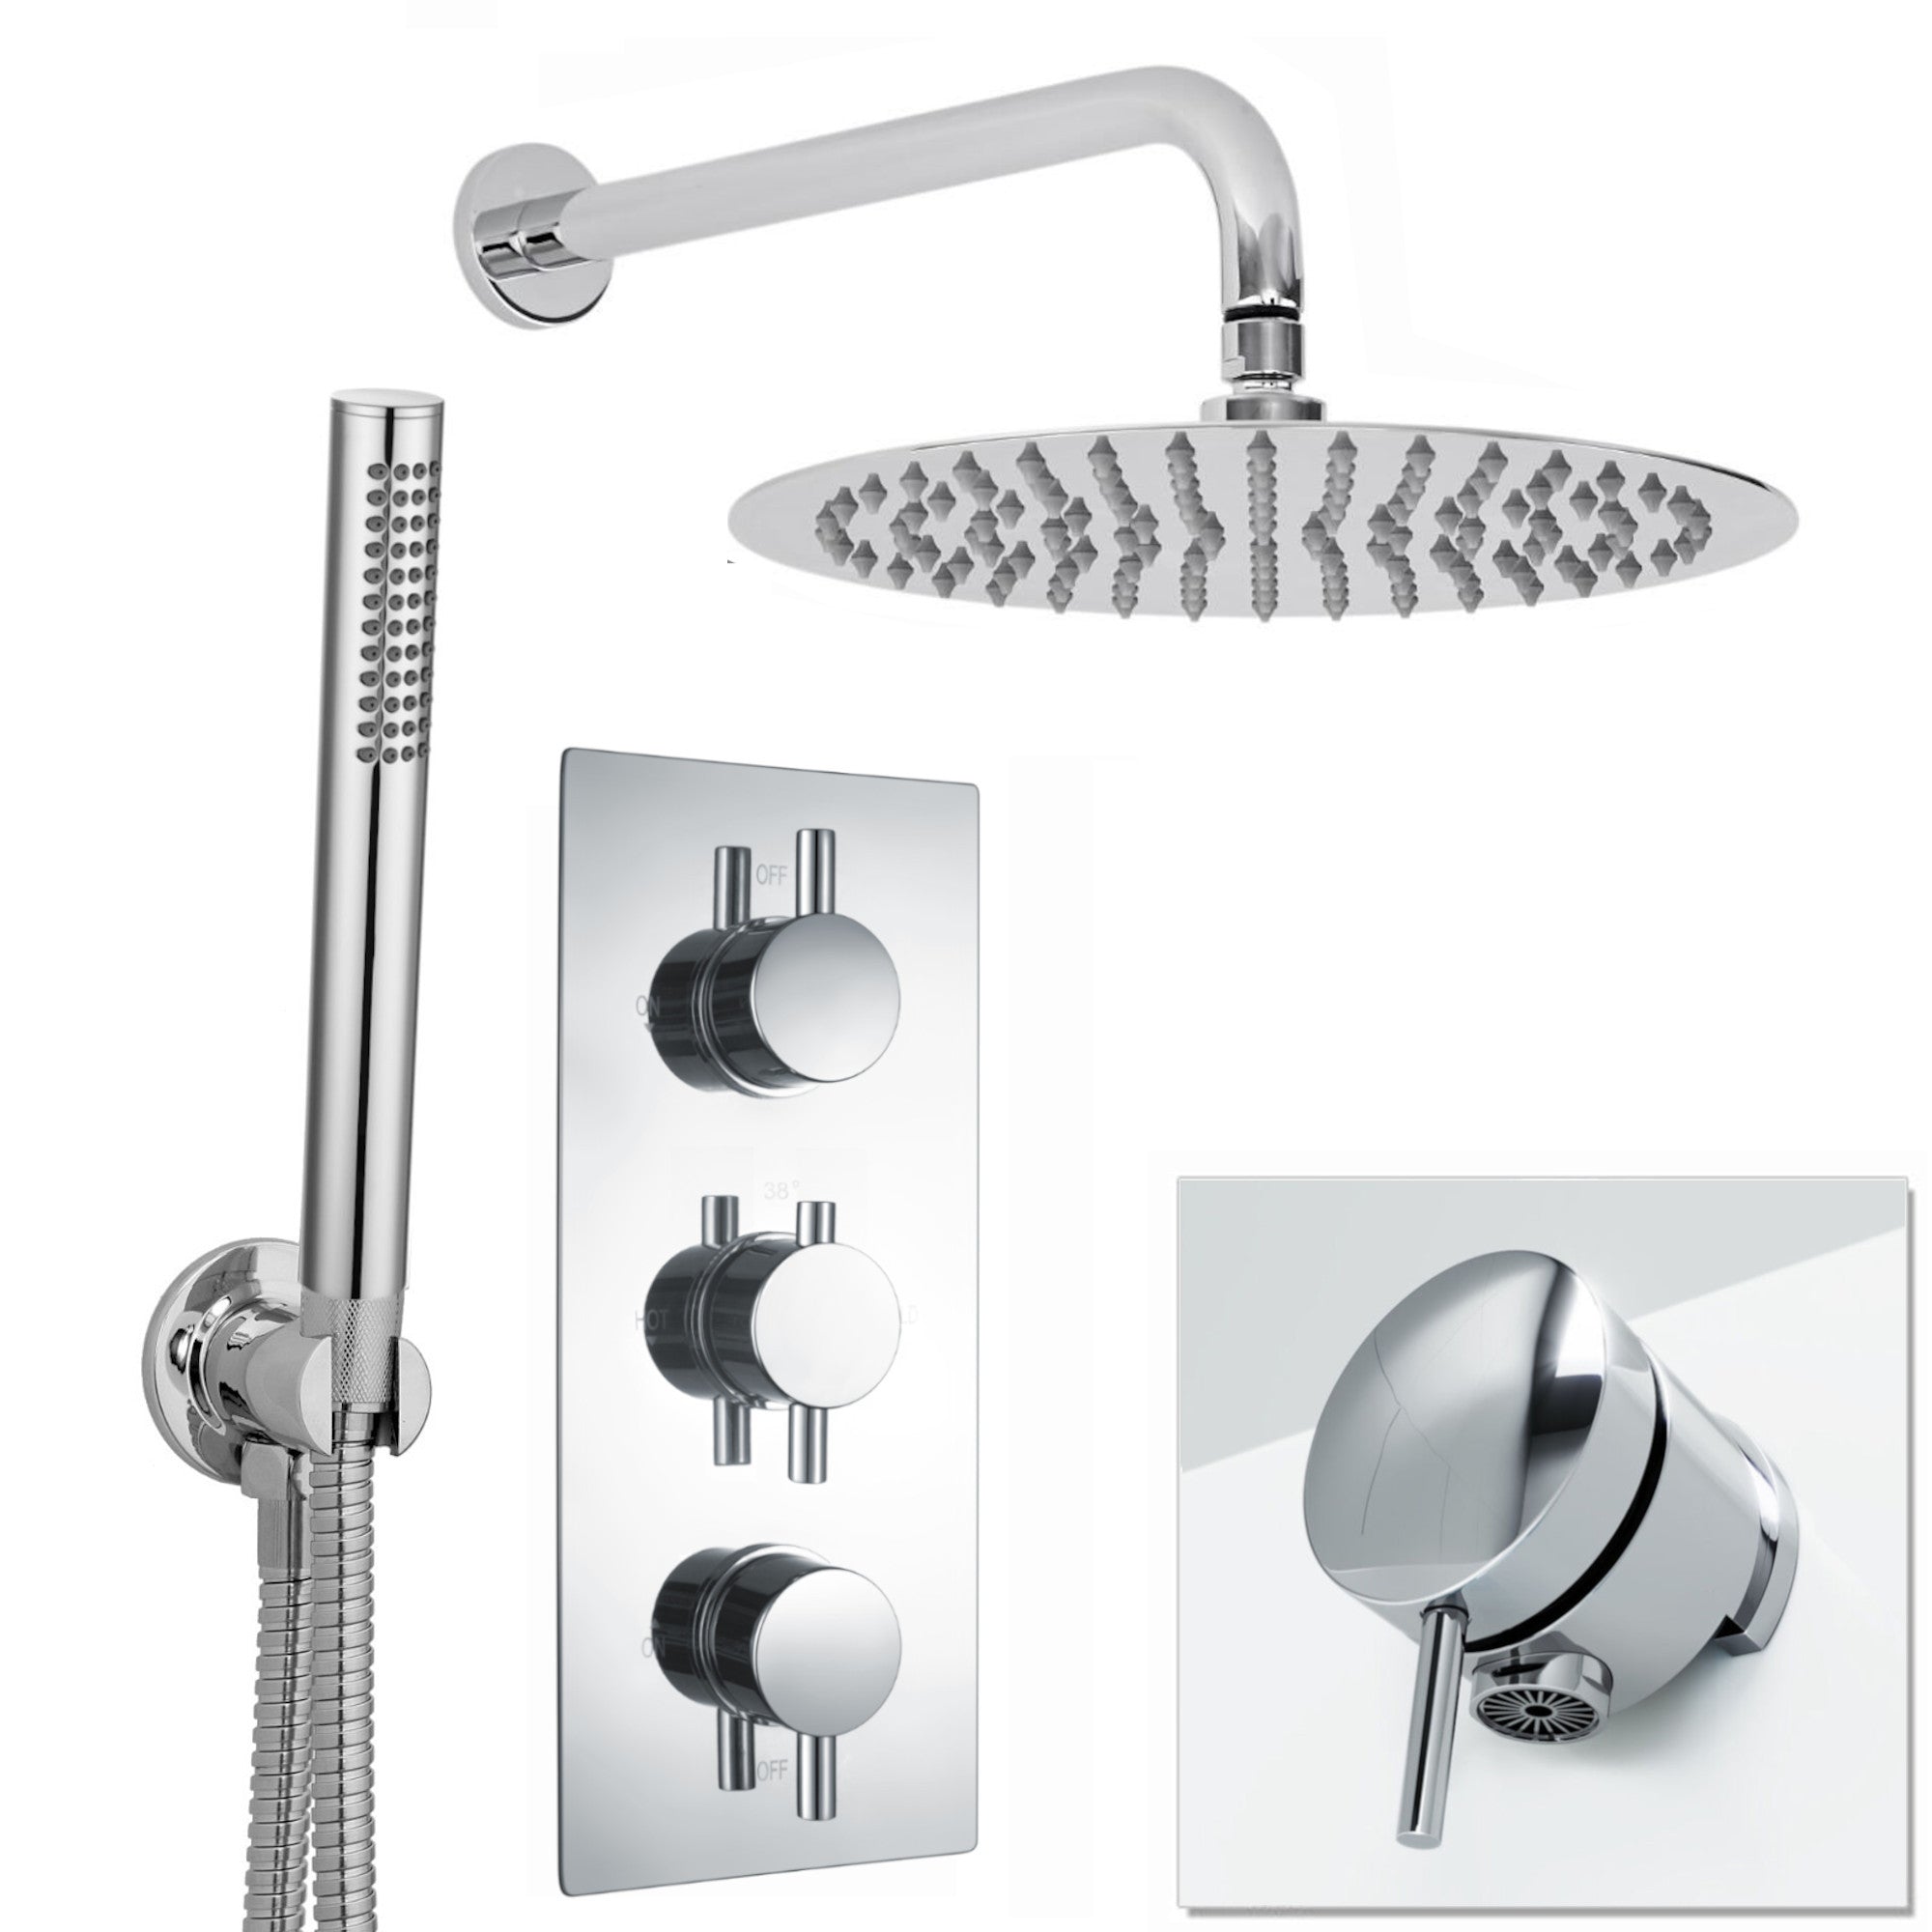 Venice Contemporary Round Concealed Thermostatic Shower Set Incl. Triple Diverter Valve, Wall Fixed 8" Shower Head, Handshower Kit, Bath Filler Waste with Overflow - Chrome (3 Outlet)